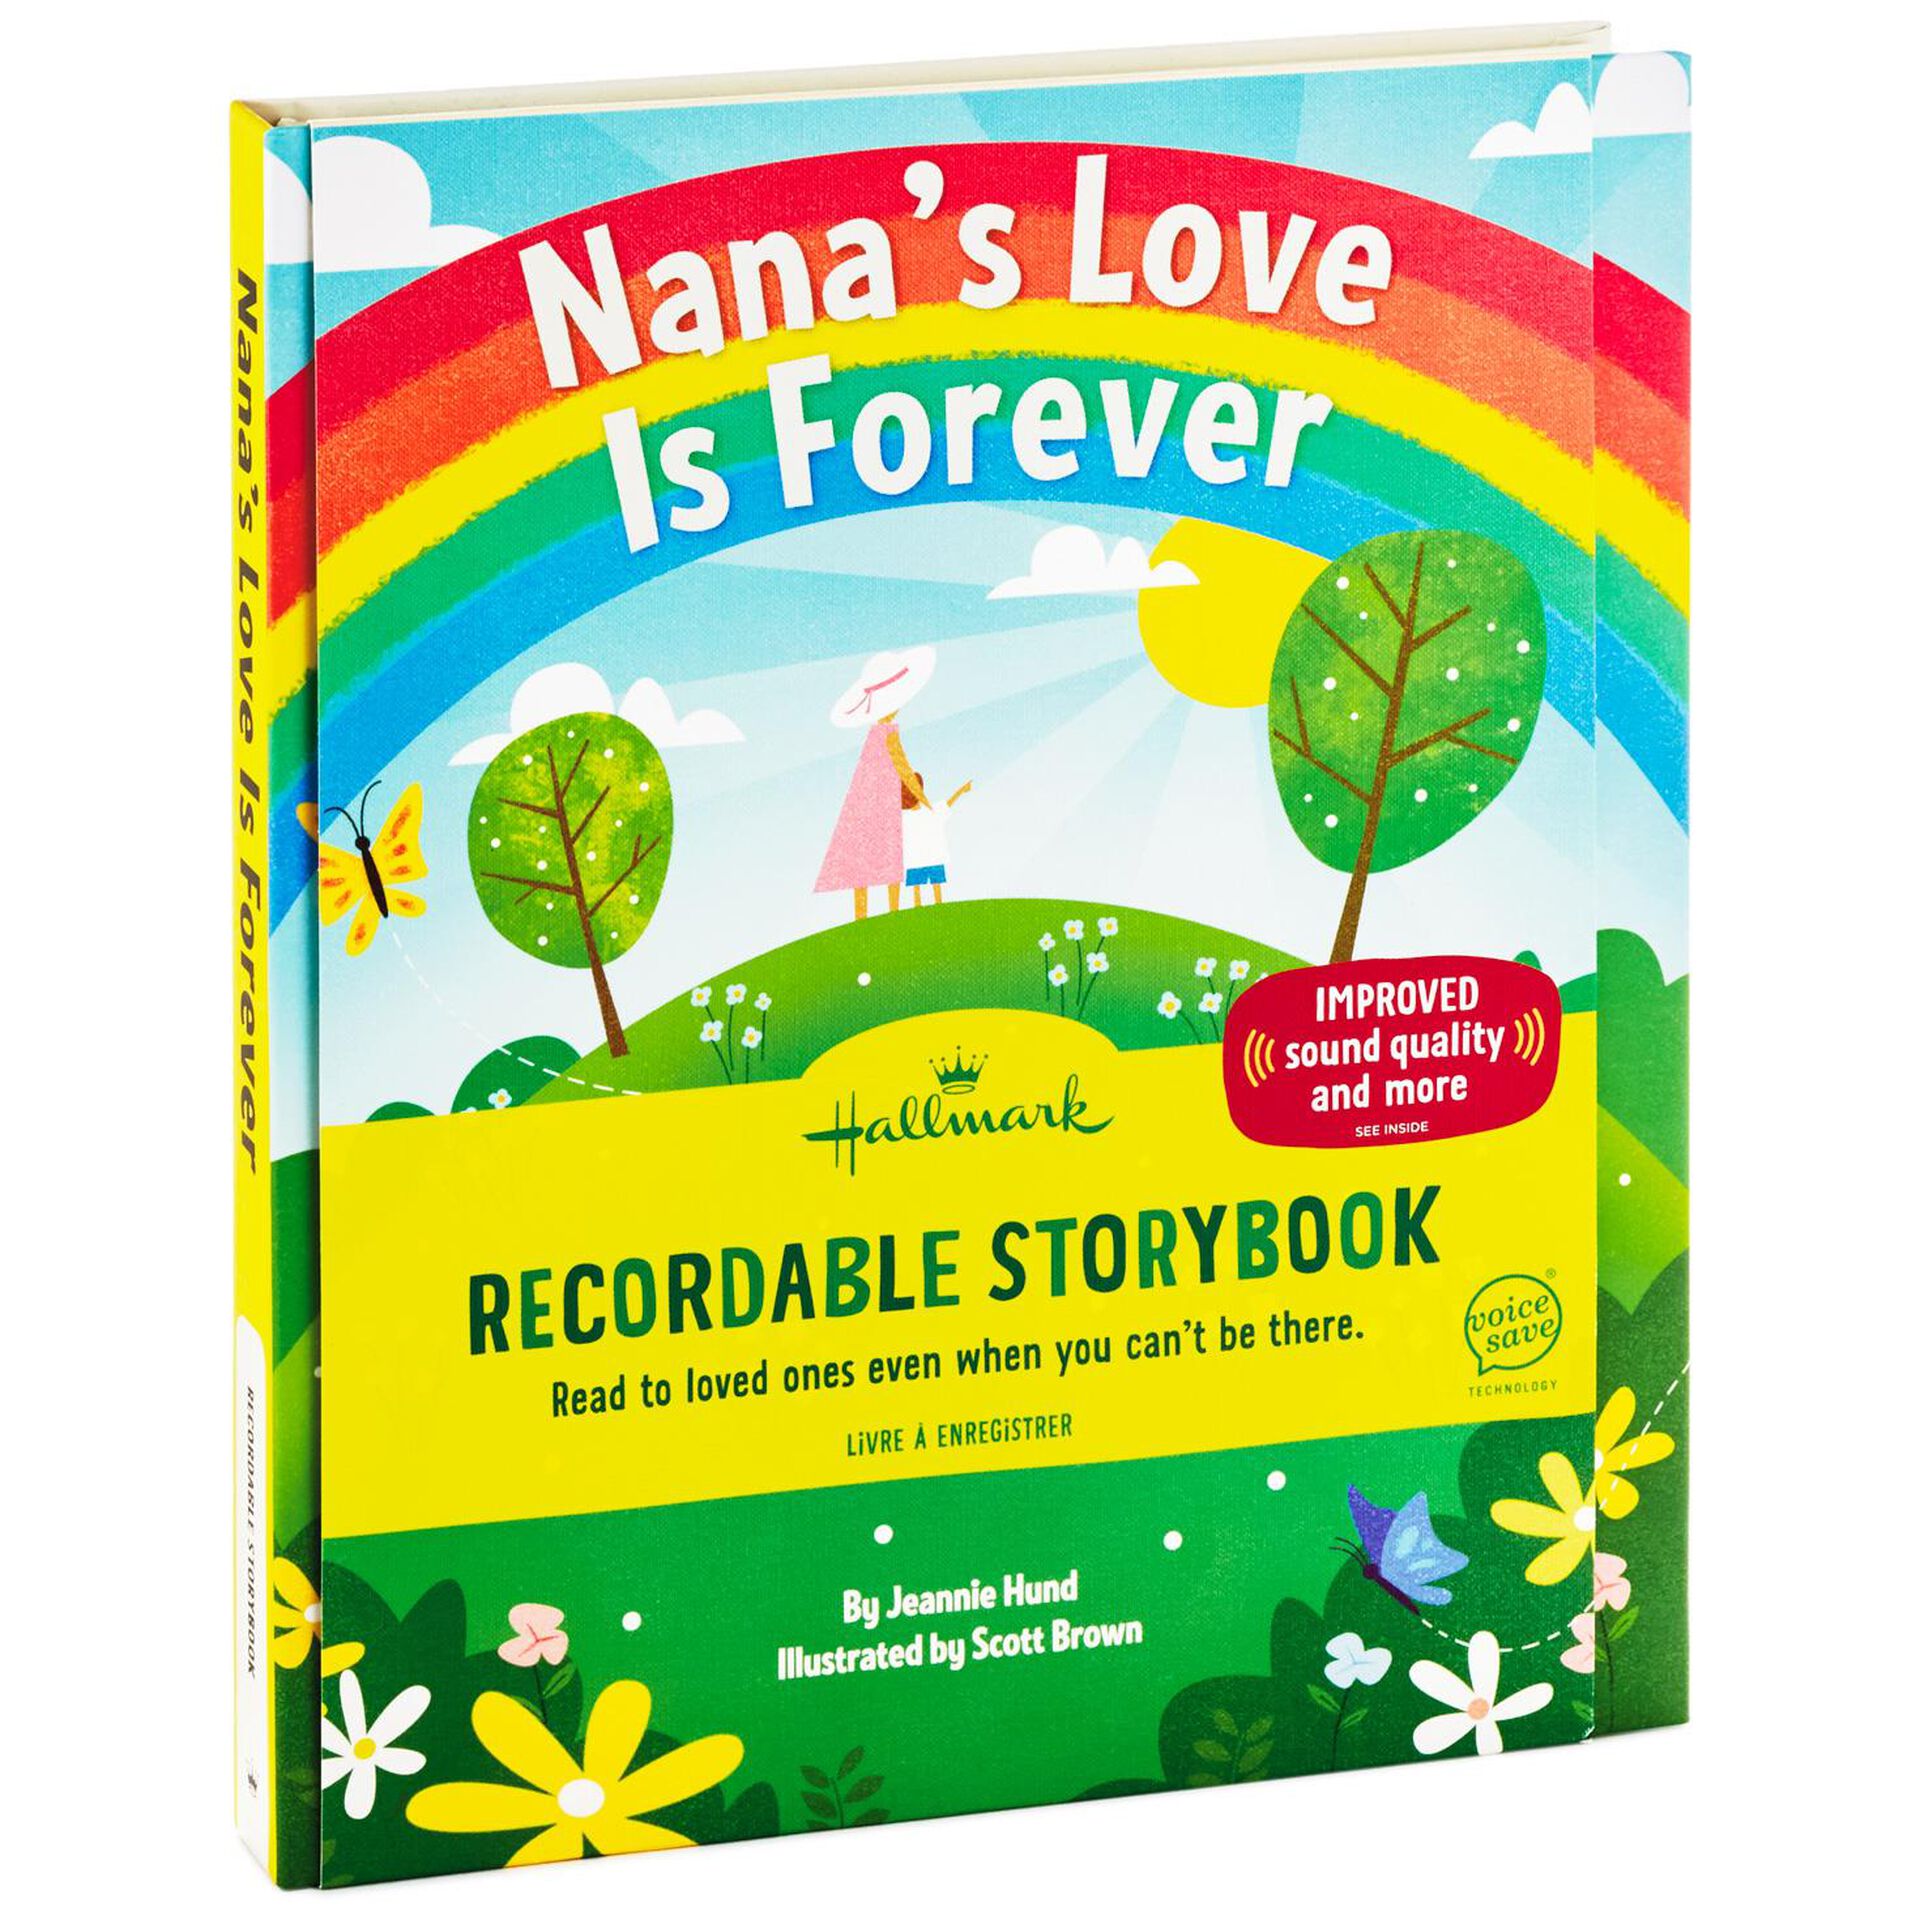 Hallmark Nanas Love is Forever Recordable Storybook Recordable Storybooks Family Juvenile Fiction 